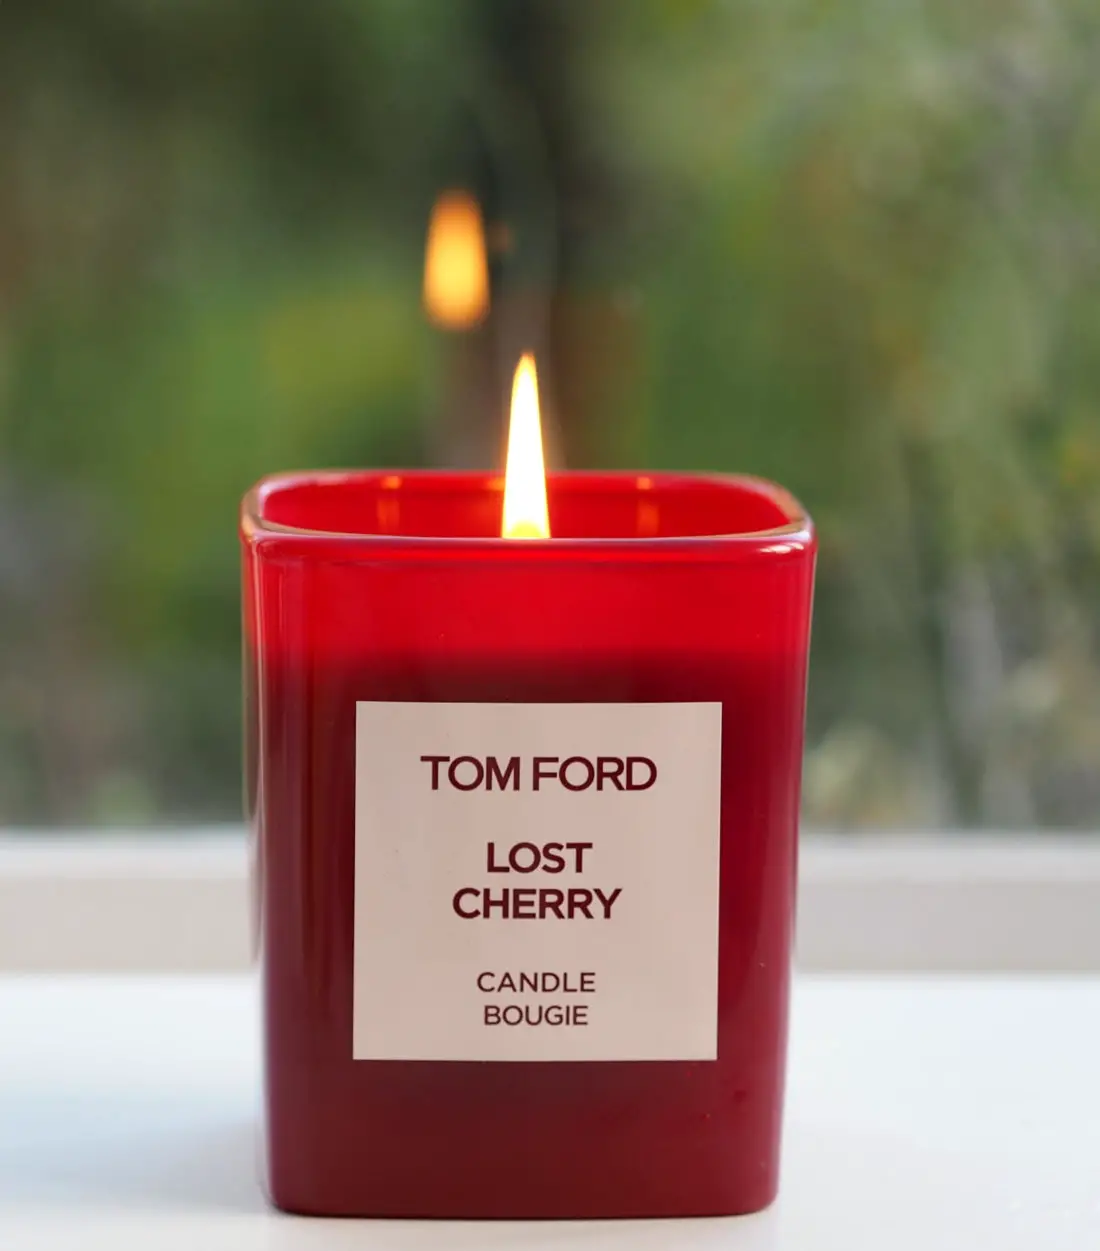 Tom Ford Lost Cherry Candle | British Beauty Blogger